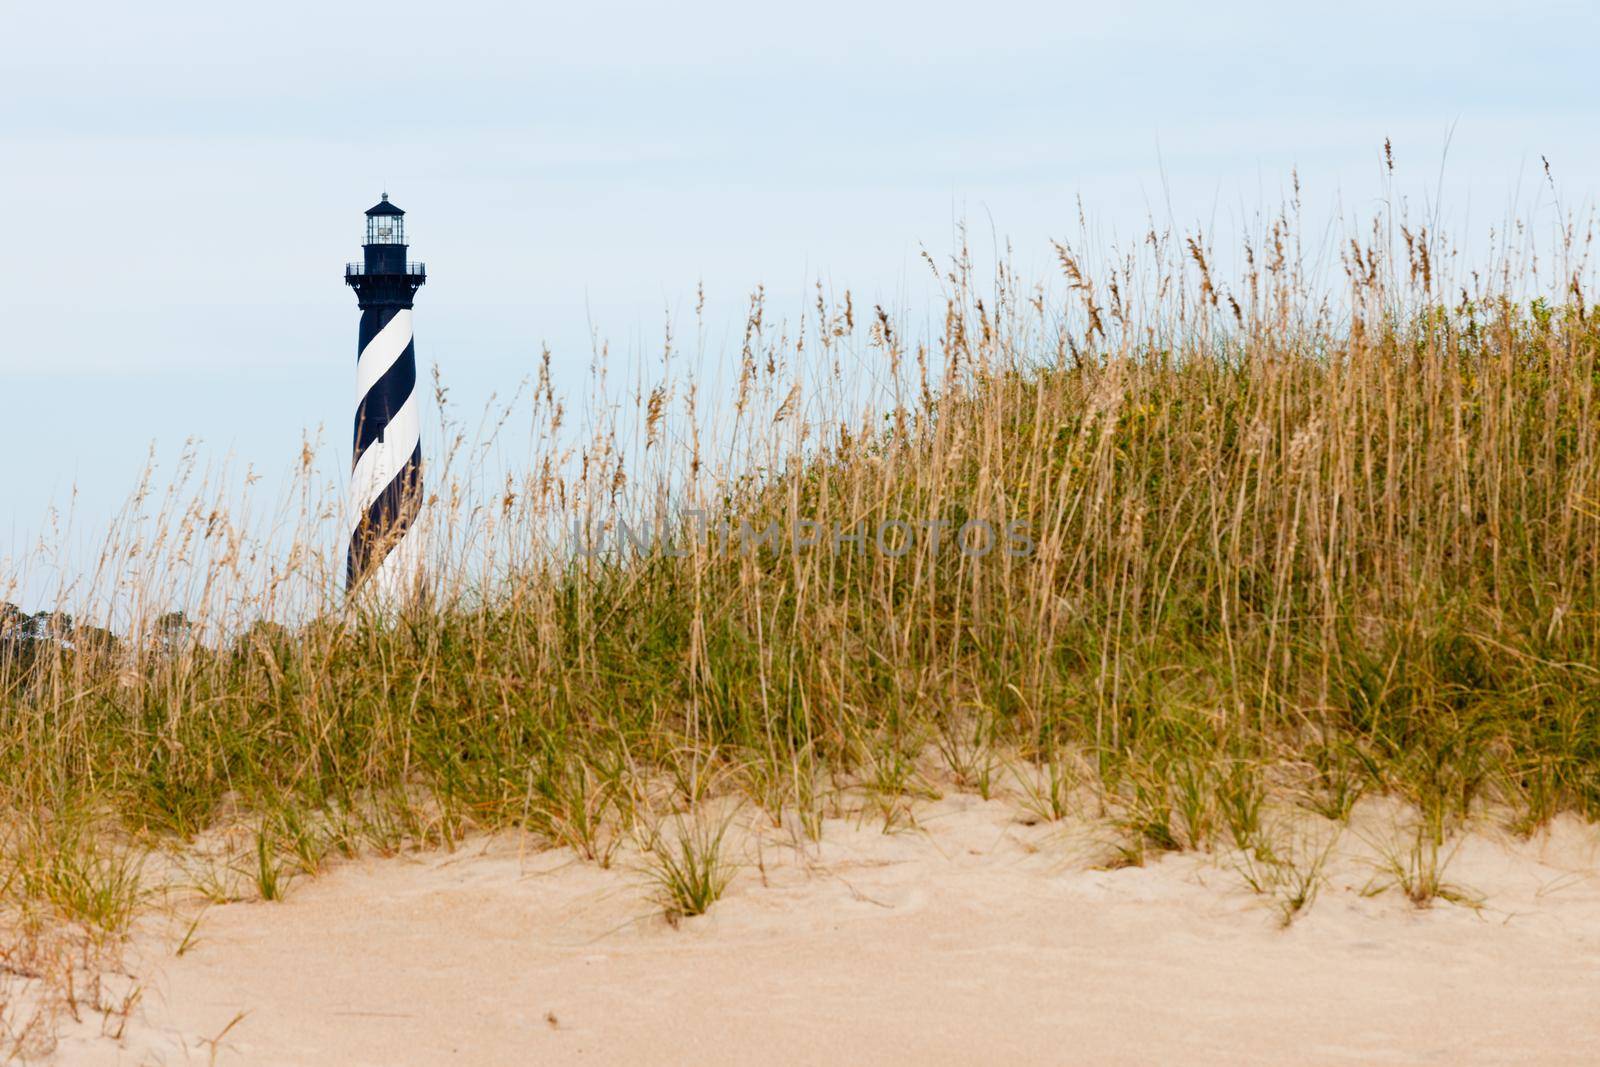 Cape Hatteras Lighthouse towers over beach dunes of Outer Banks island near Buxton, North Carolina, US